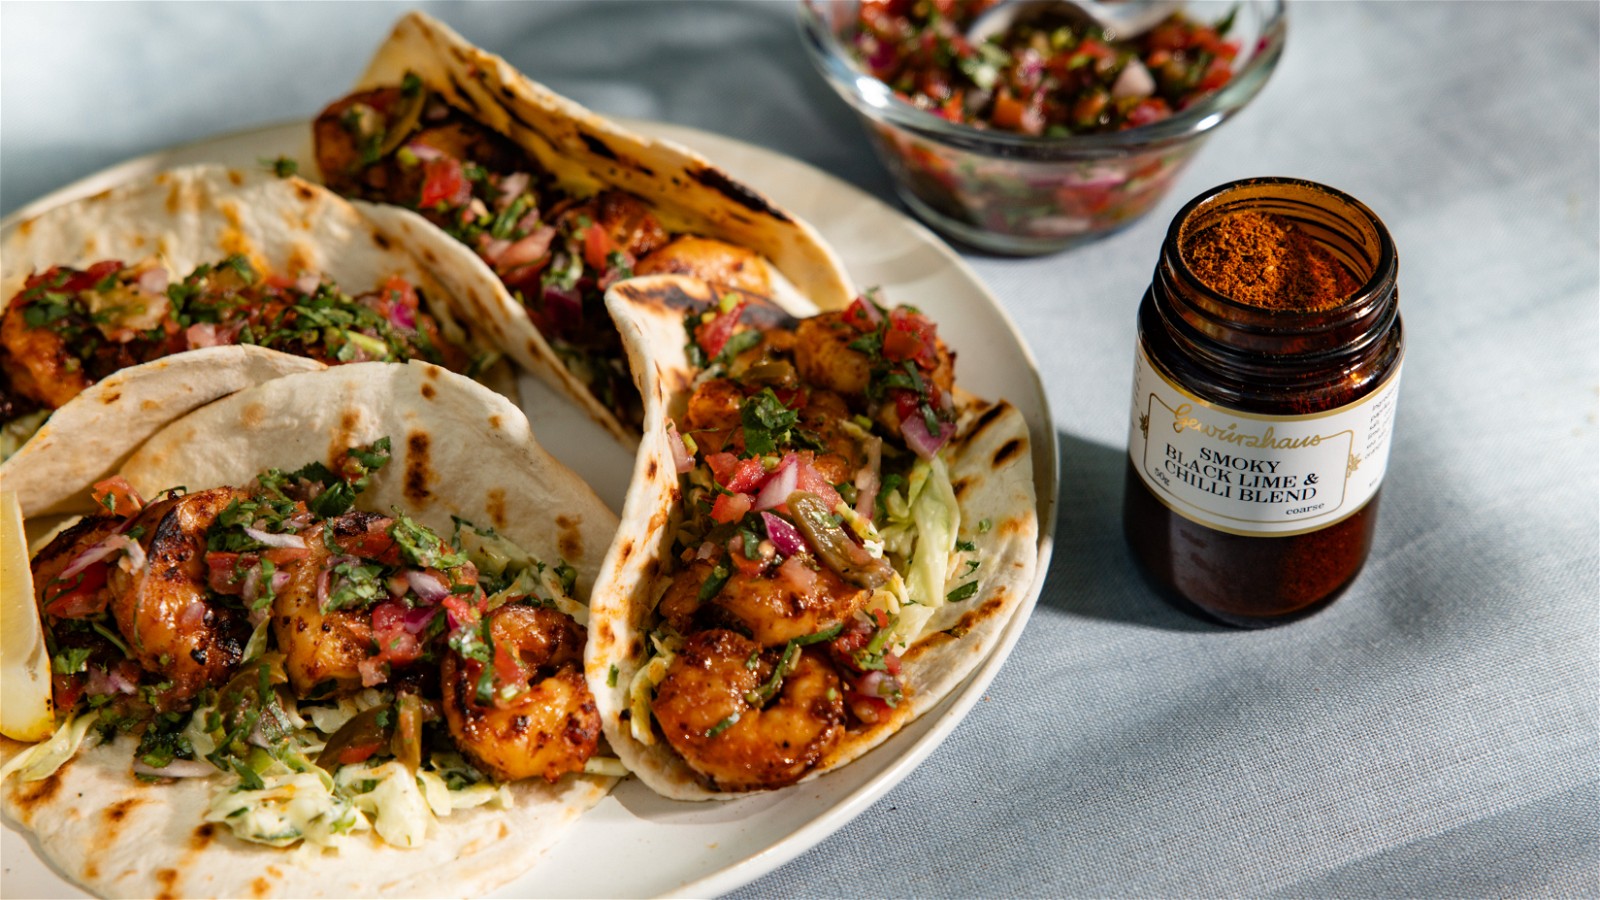 Image of Grilled Prawn Tacos with Creamy Slaw and Pico de Gallo